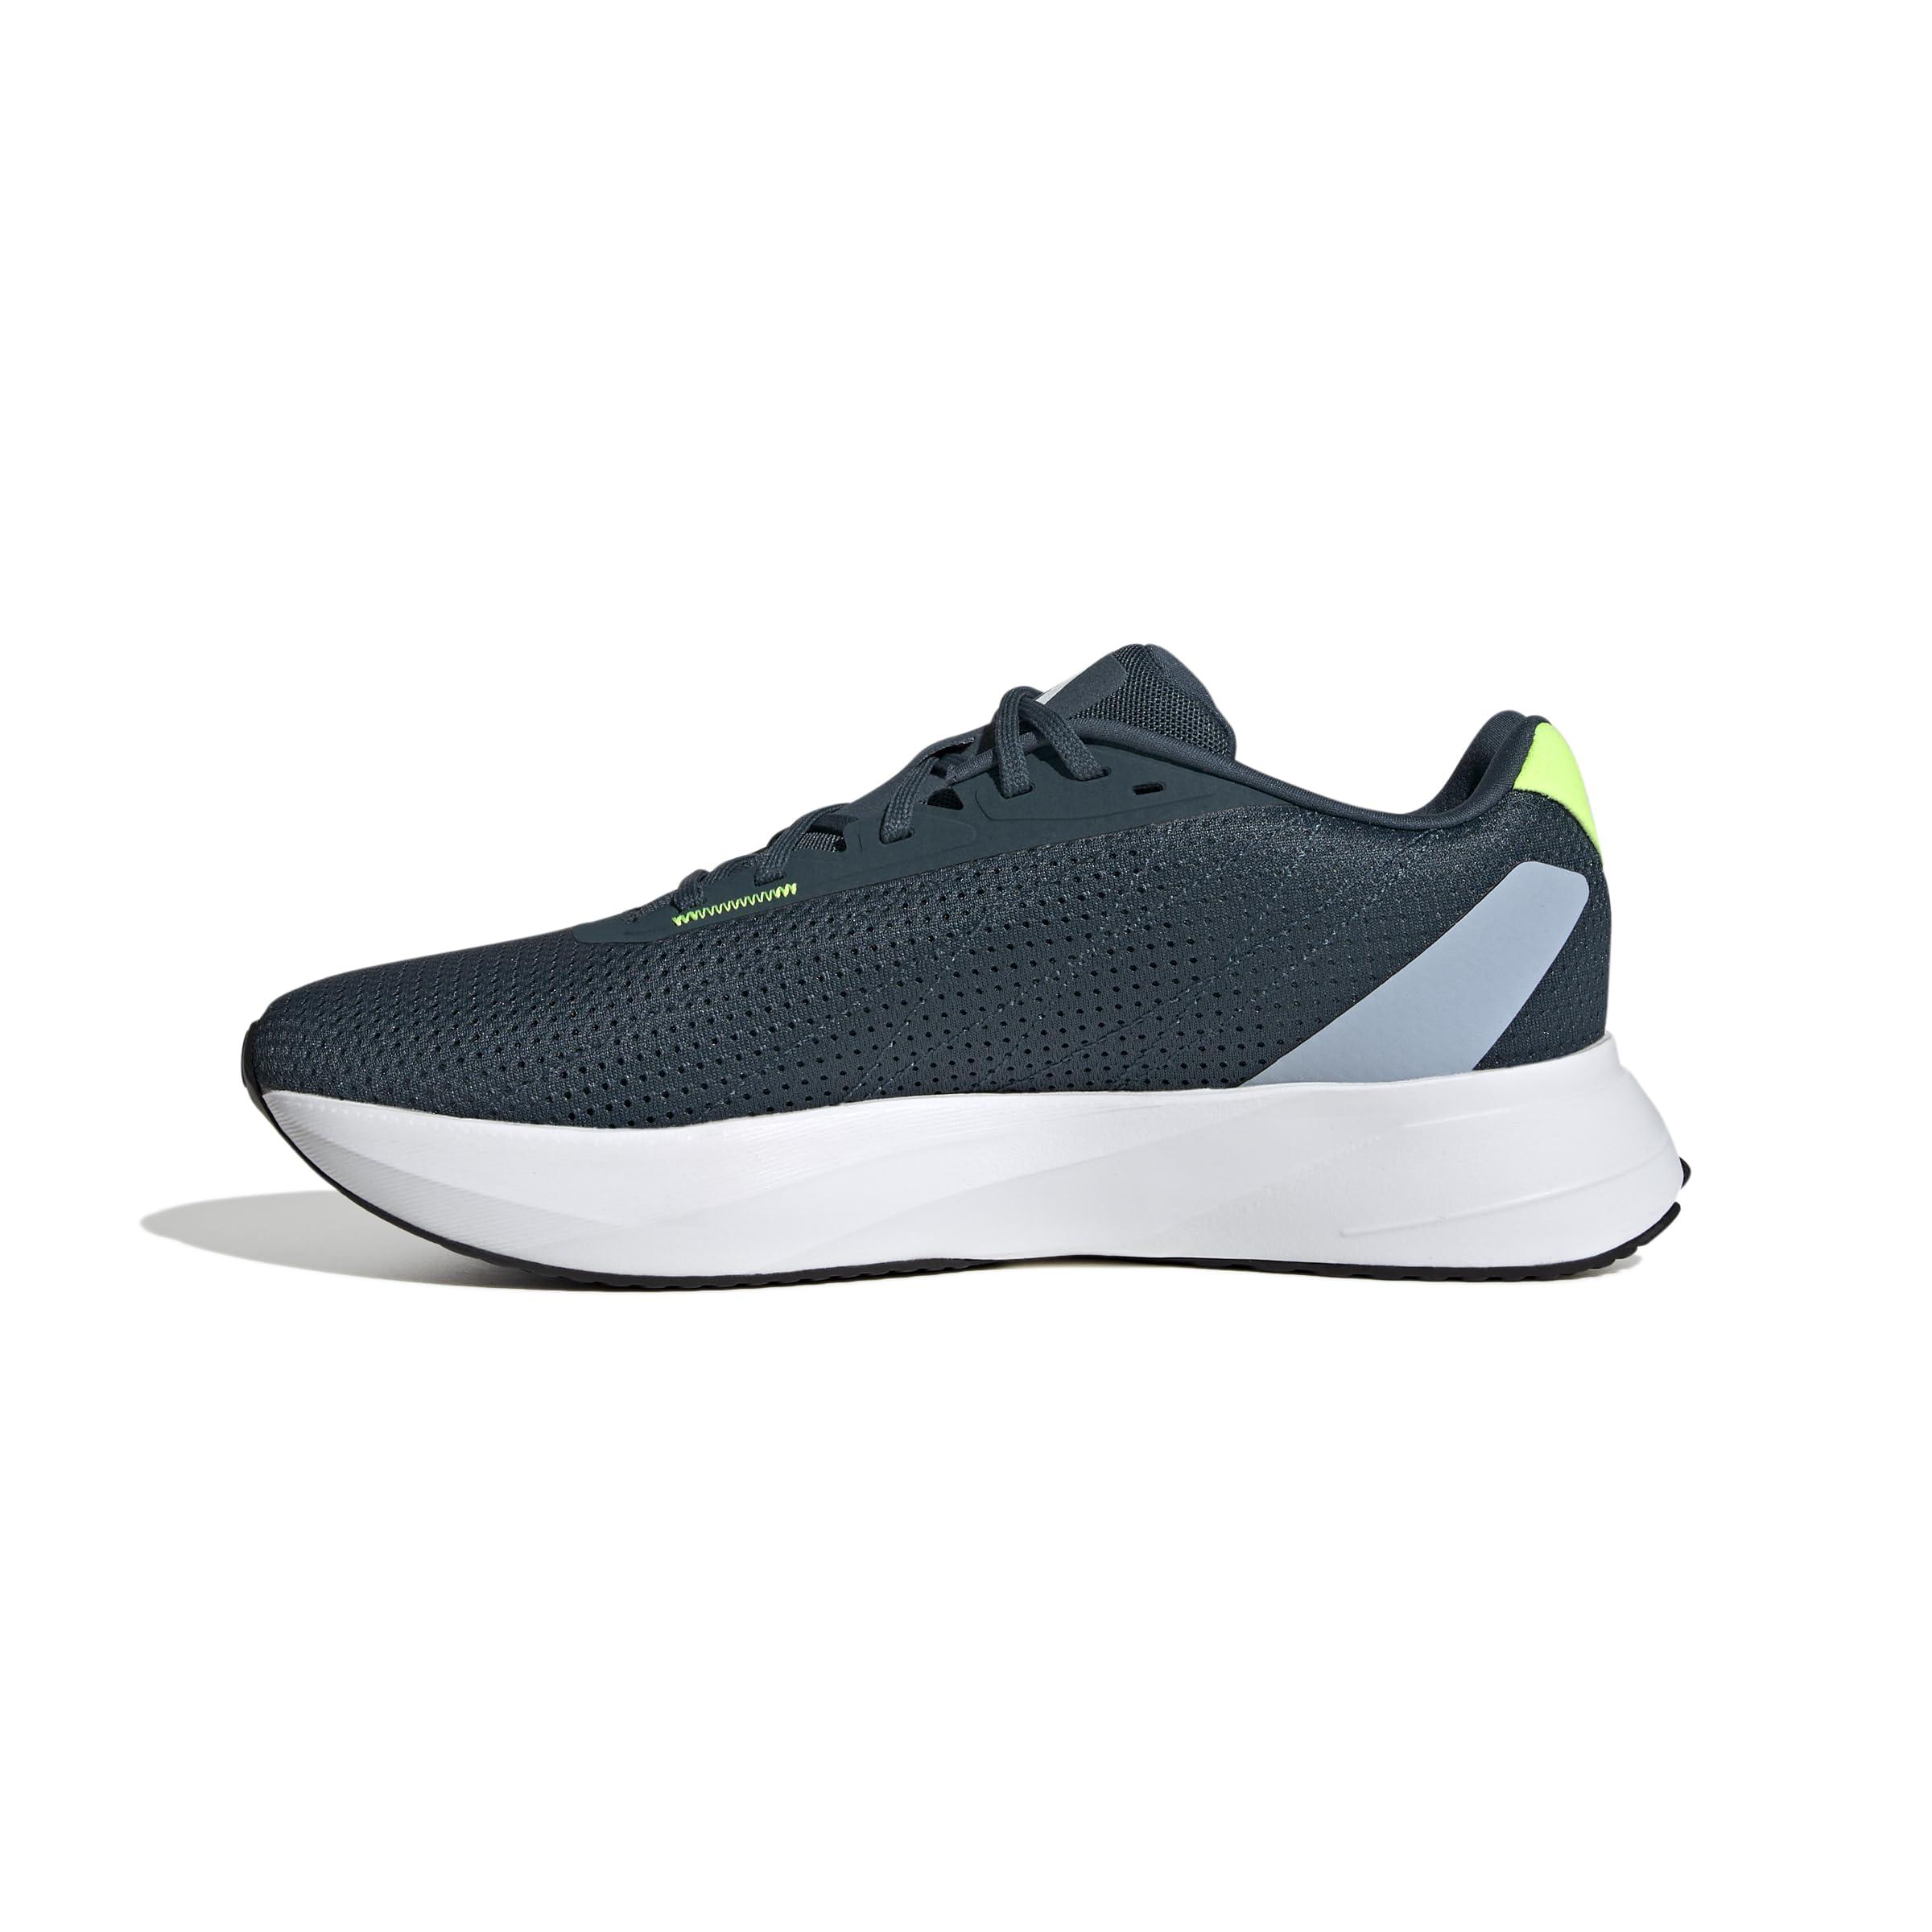 Paytm Mall - Great offers on Sports Shoes from A Gear:... | Facebook